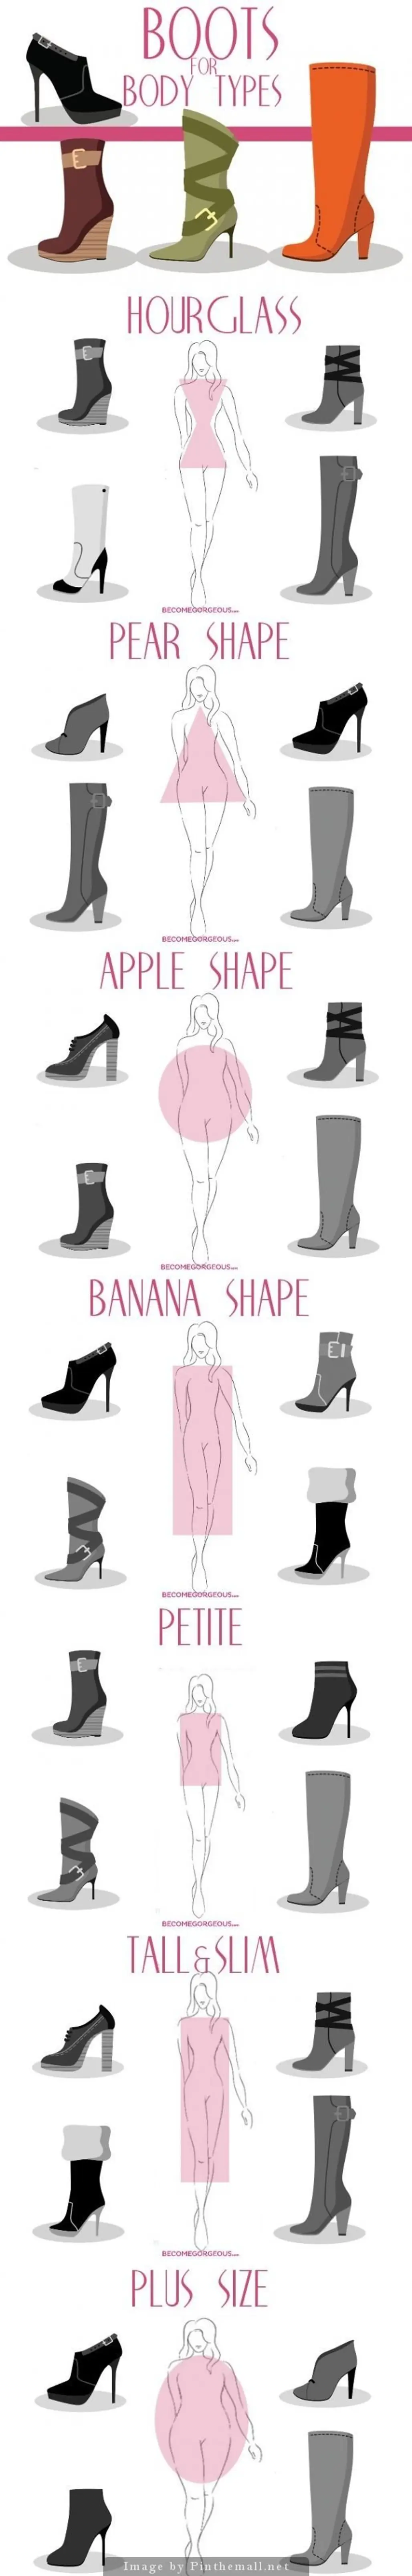 Best Boots for Your Body Type